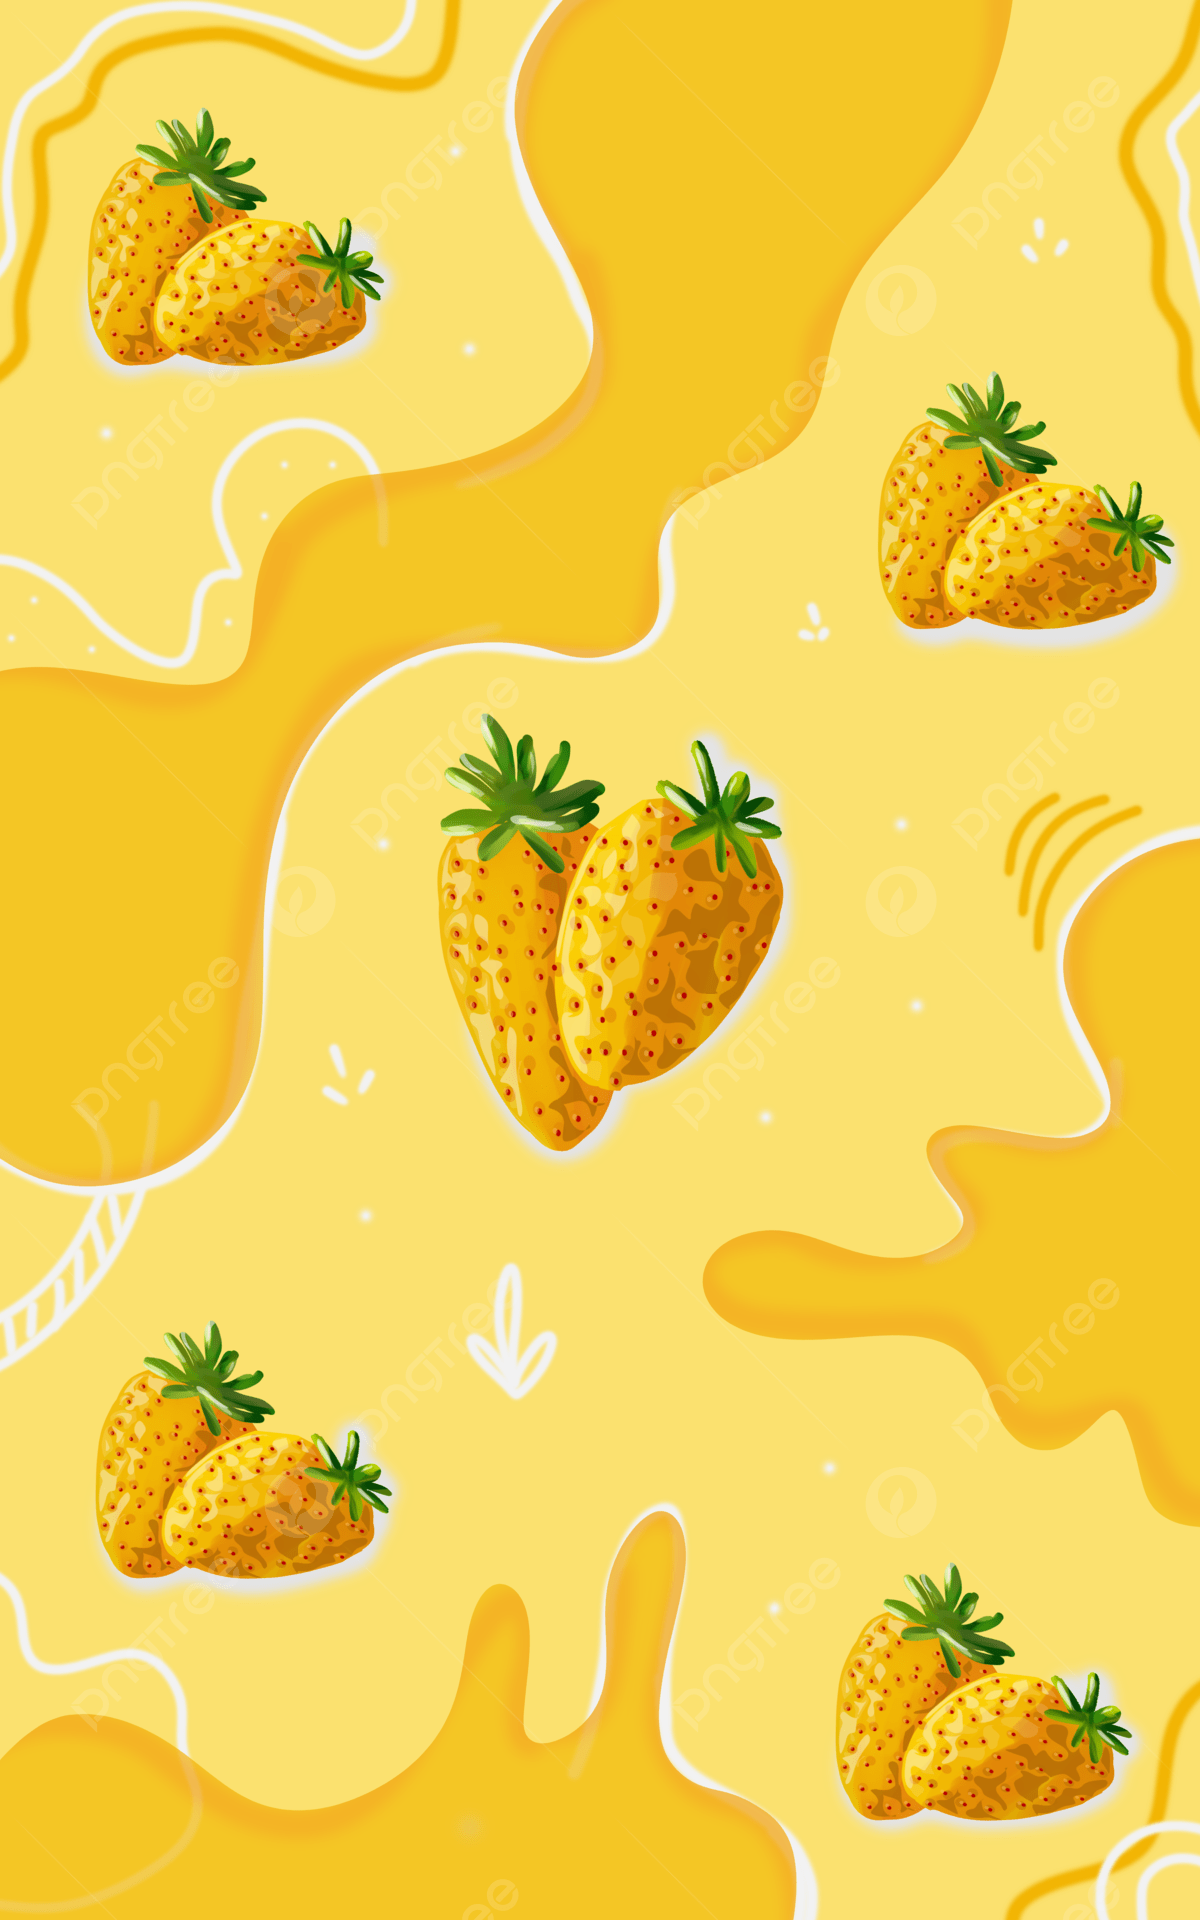 Yellow Strawberry Wallpaper Background, Aesthetic, Fruits Art, Background Background Image for Free Download